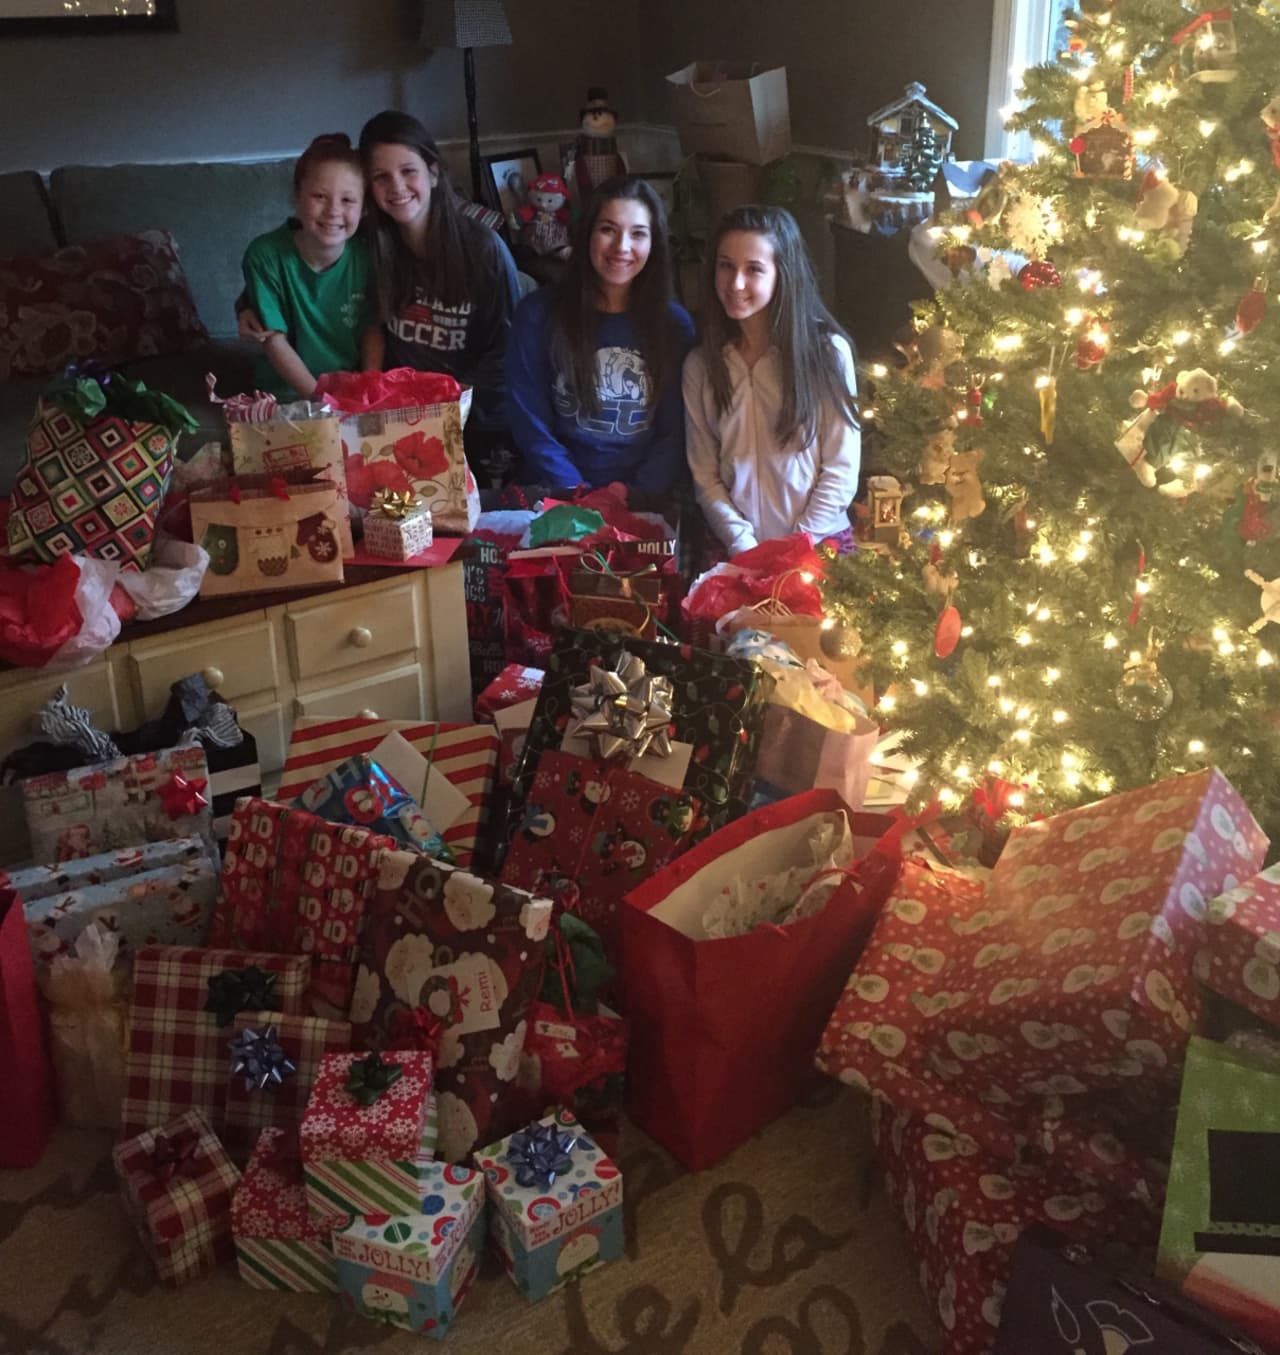 Remi Presky, surrounded by donated gifts, spends Christmas with the Sheehan family.